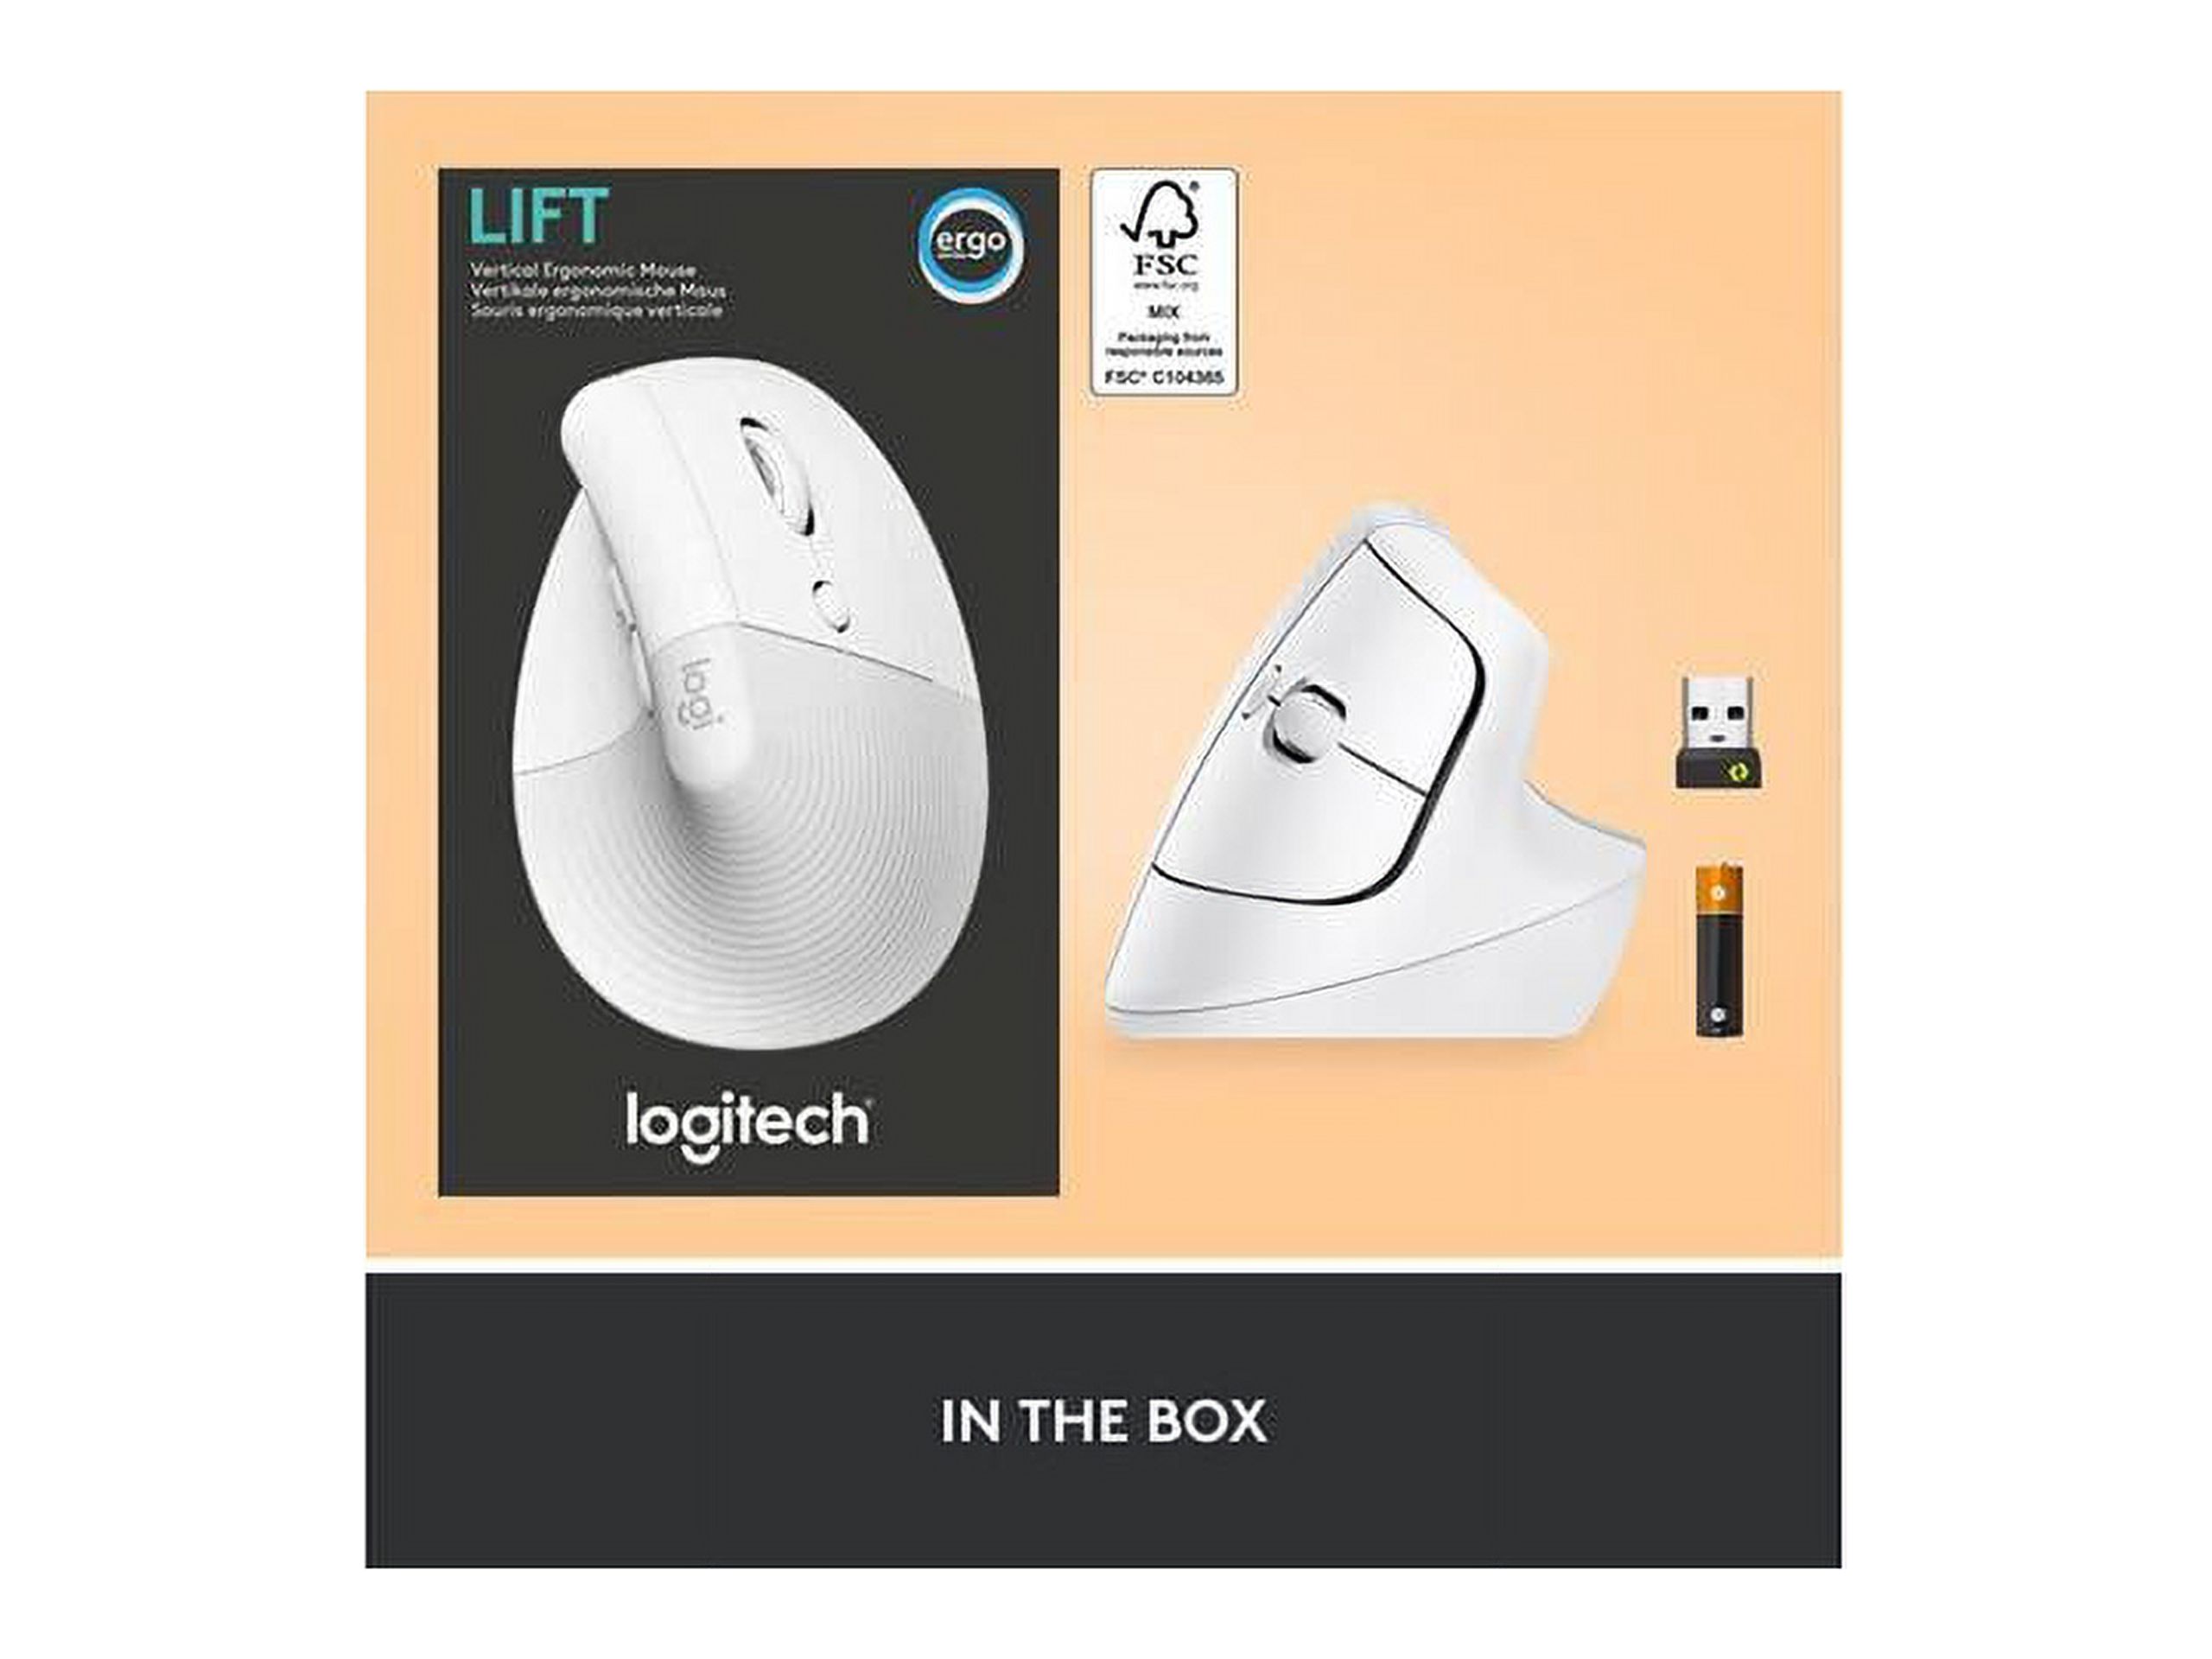 Logitech Lift Vertical Ergonomic Mouse, Wireless, Bluetooth or Logi Bolt USB receiver, Quiet clicks, 4 buttons, compatible with Windows/macOS/iPadOS, Laptop, PC - Off White - image 3 of 10